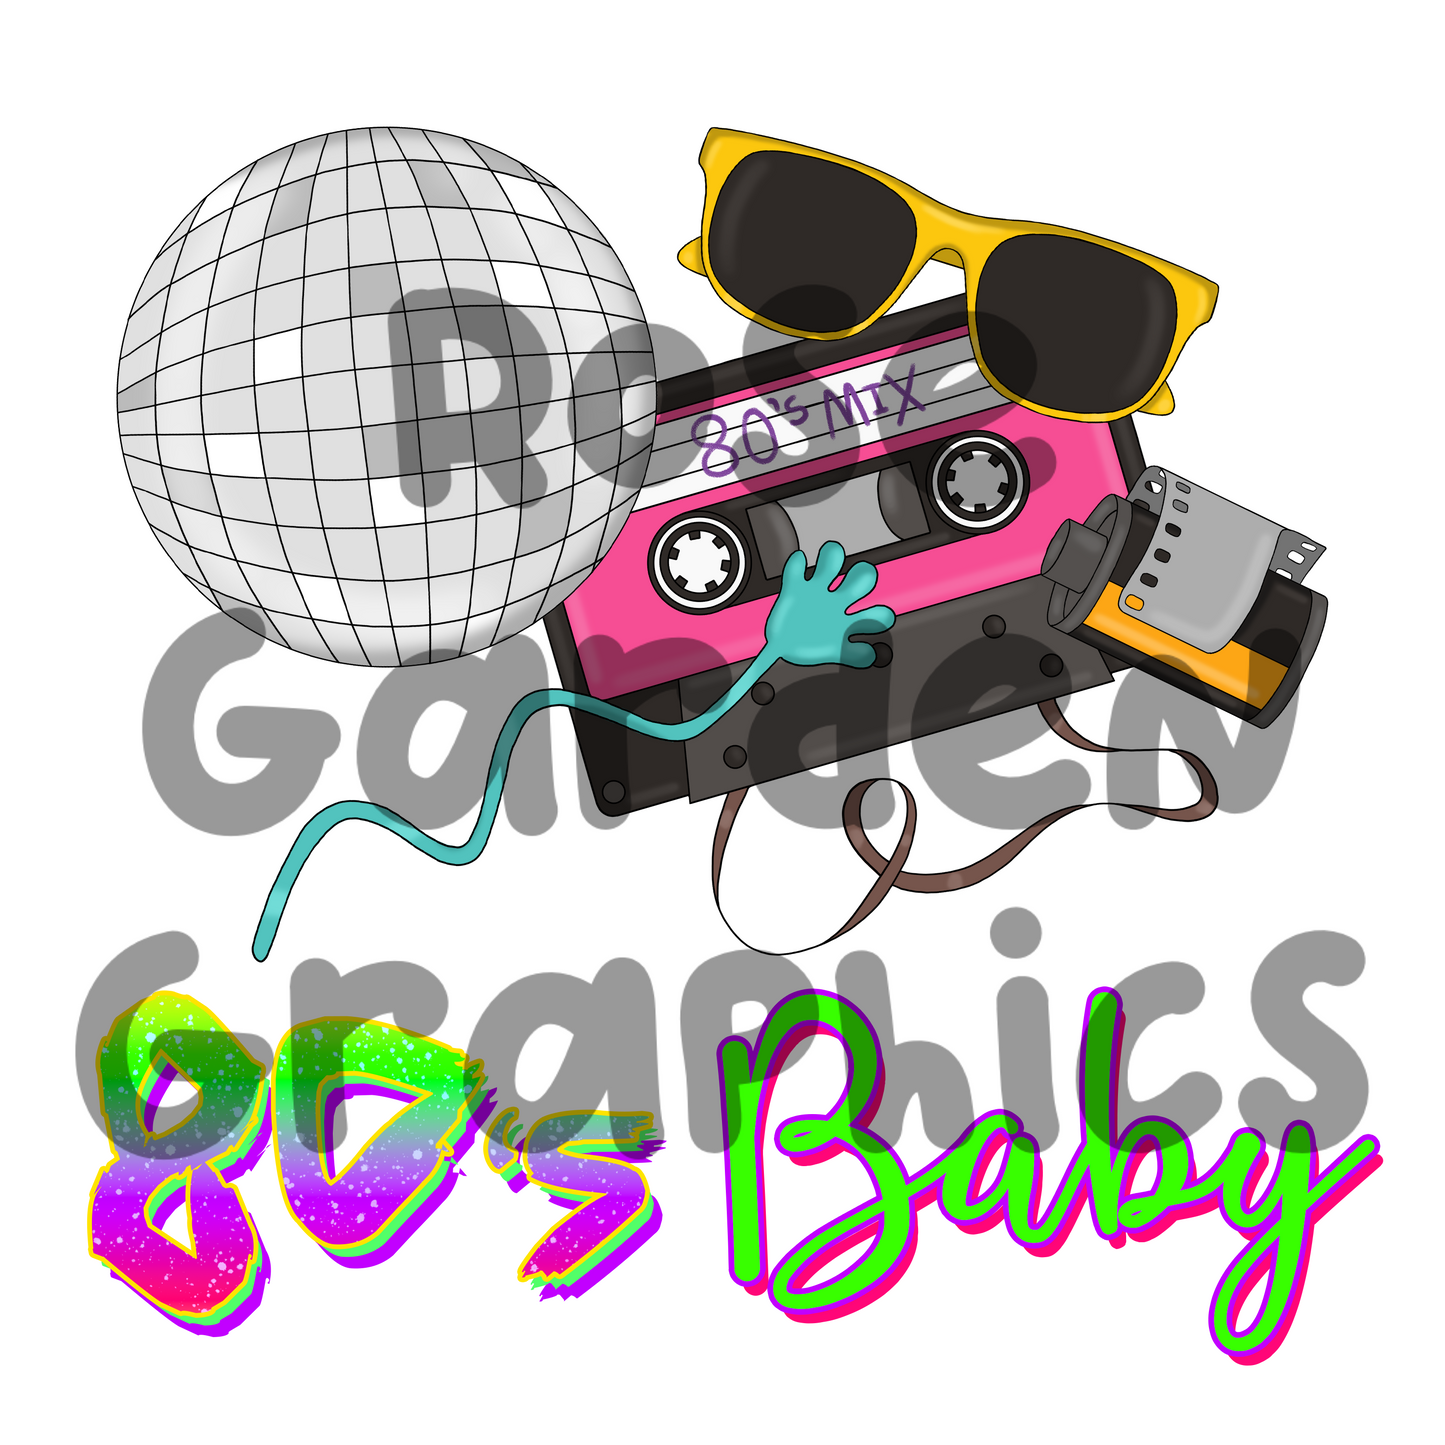 80's Baby 2 PNGs